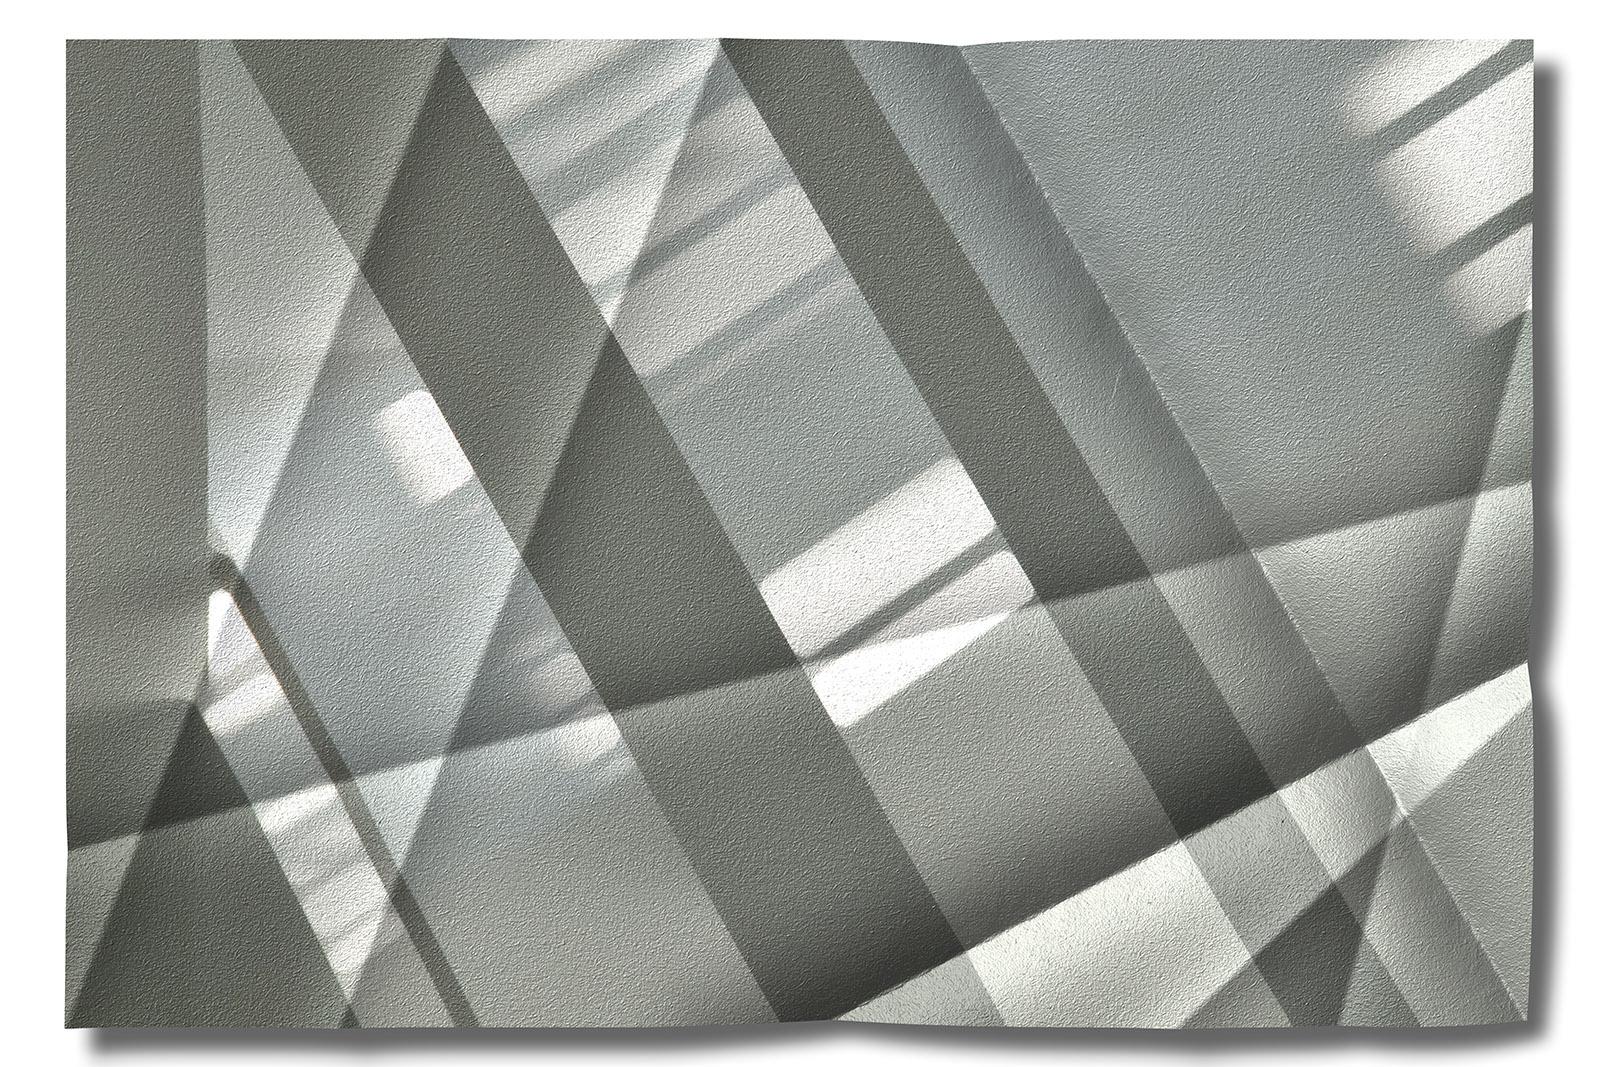 Architectonic 4 - Signed limited edition pigment print by Michael Banks For Sale 3